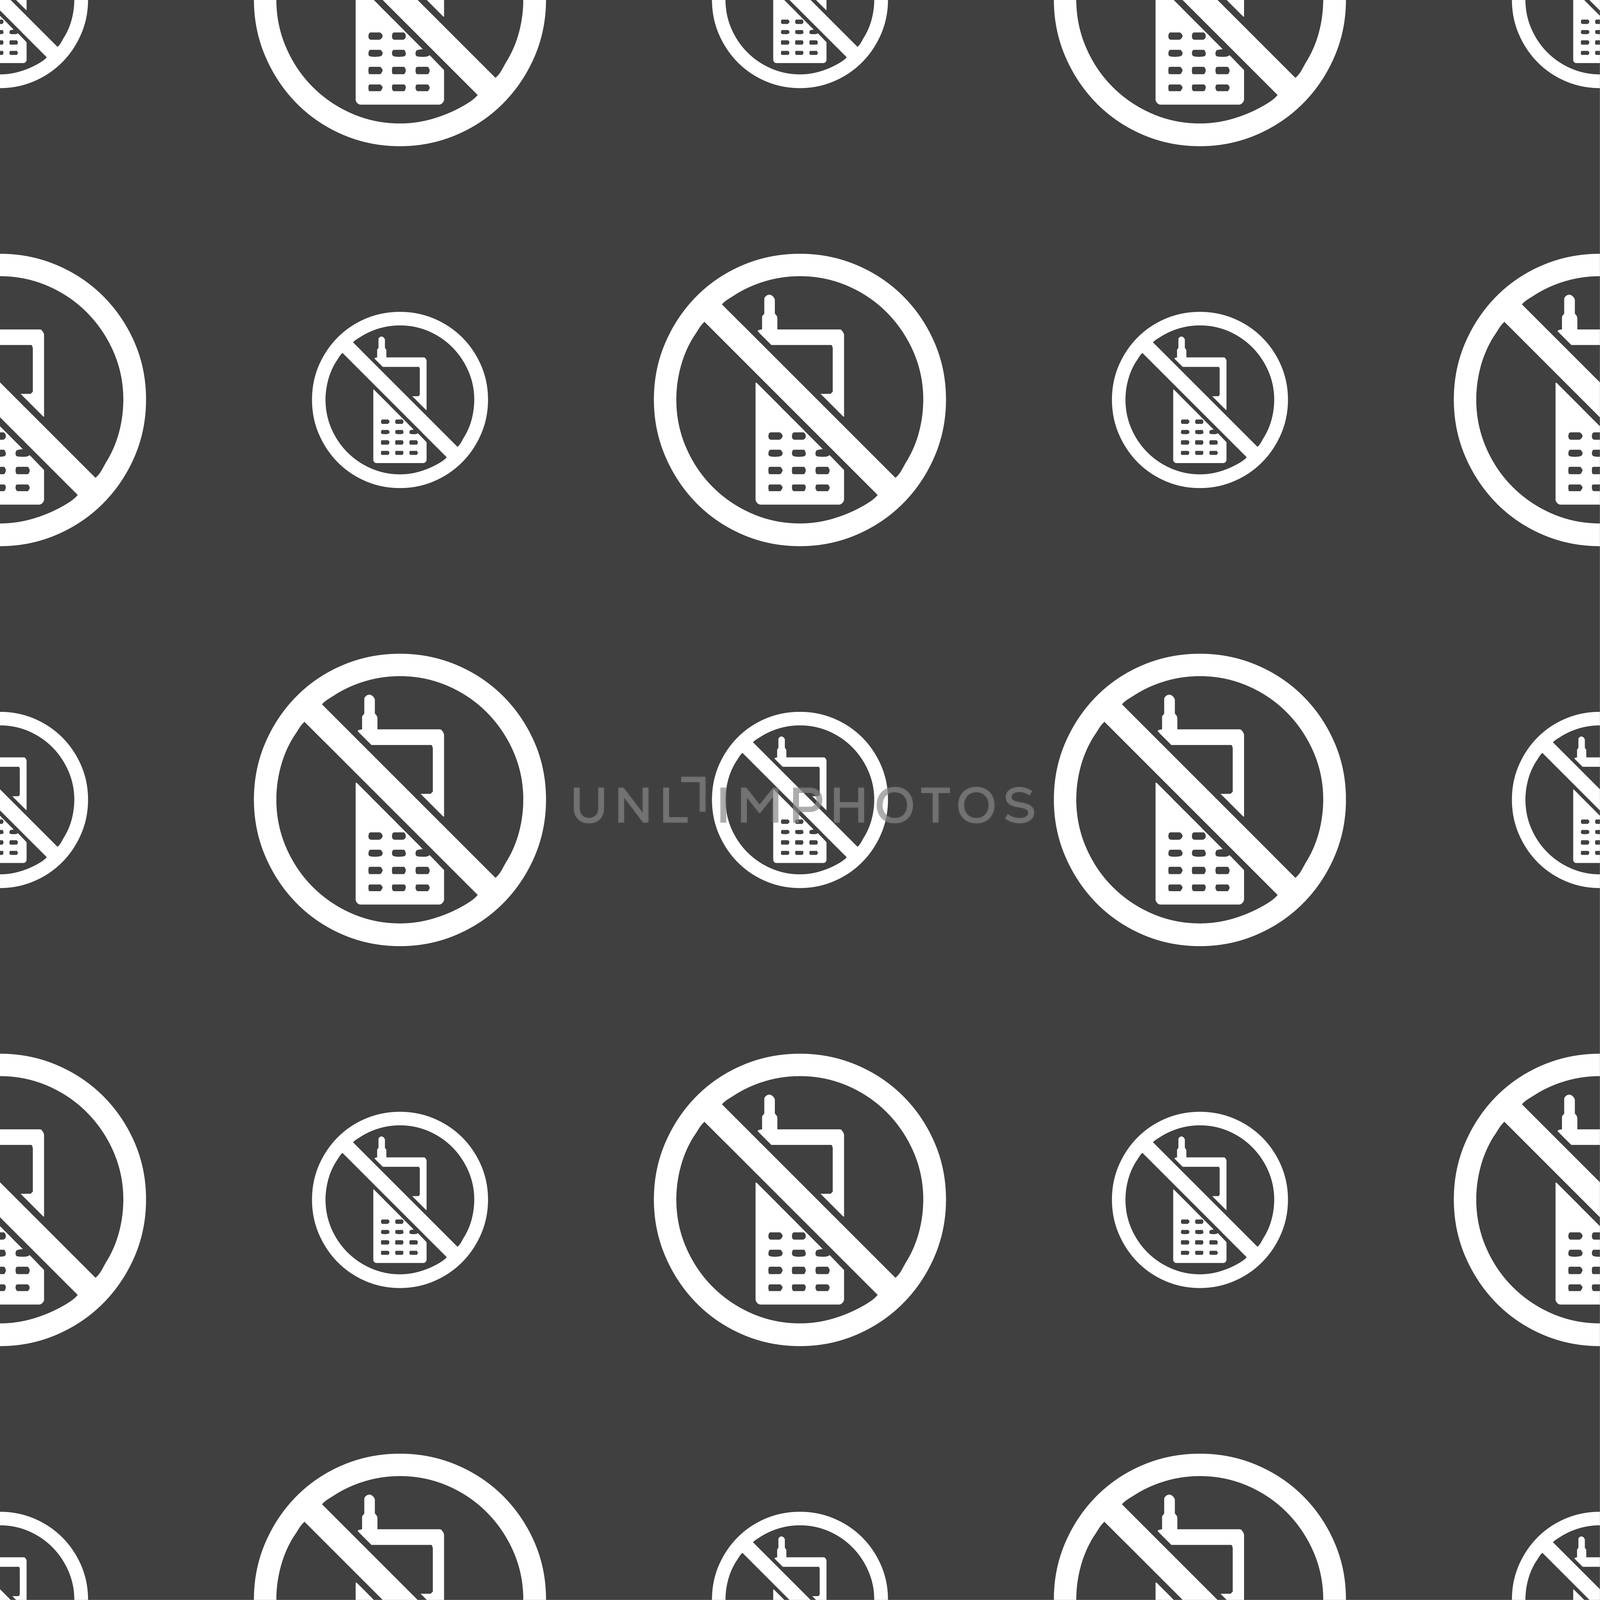 mobile phone is prohibited icon sign. Seamless pattern on a gray background. illustration